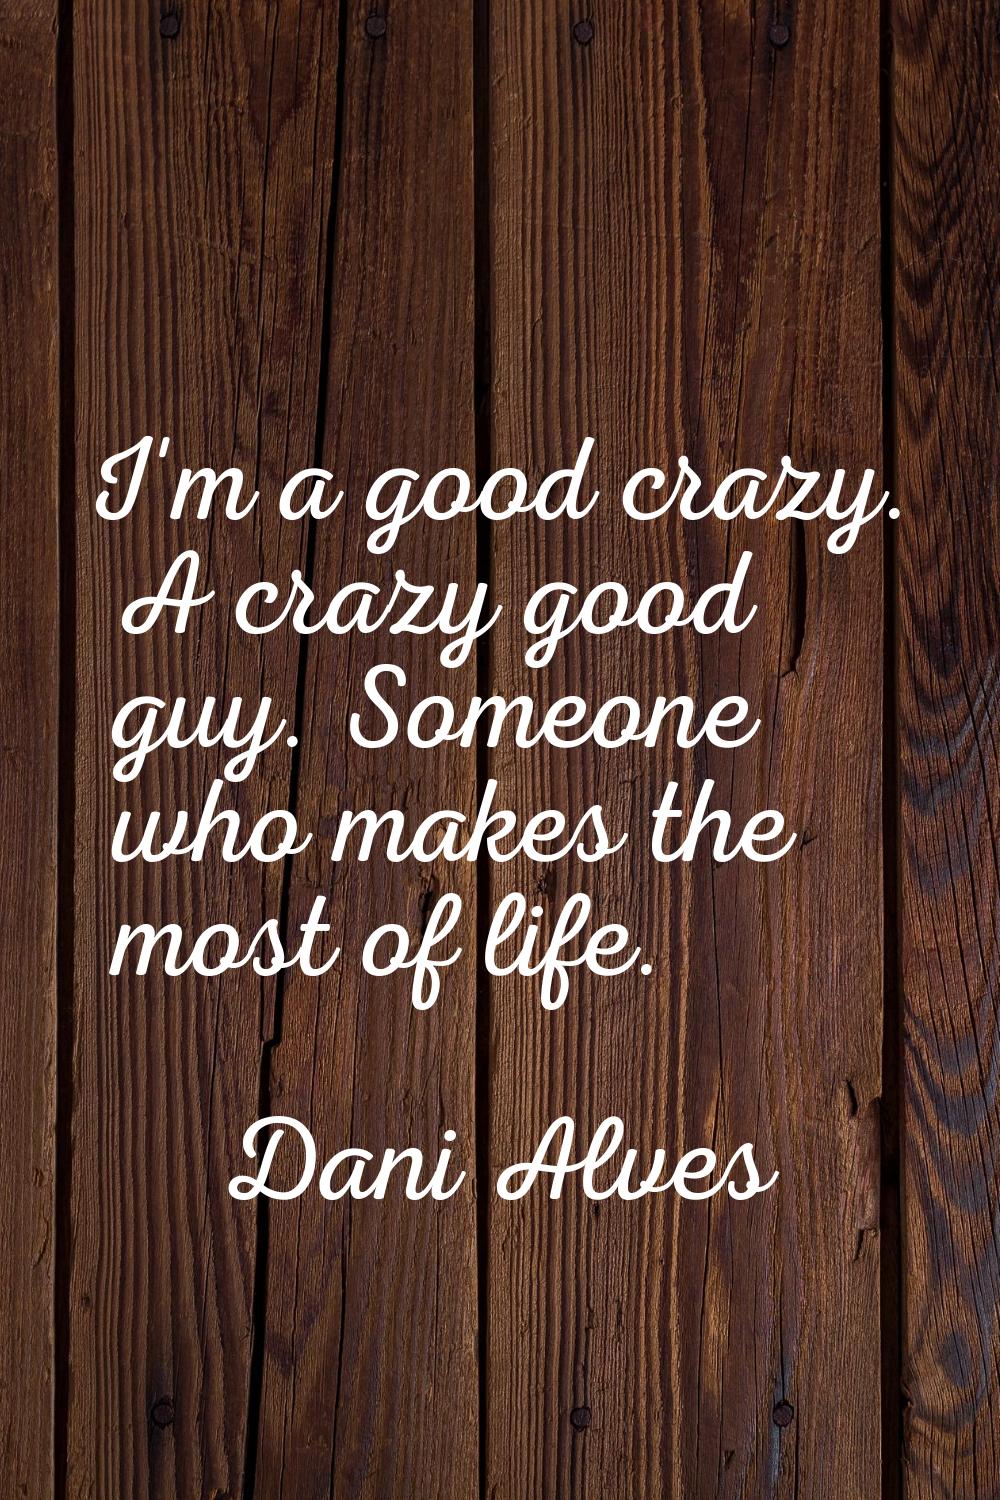 I'm a good crazy. A crazy good guy. Someone who makes the most of life.